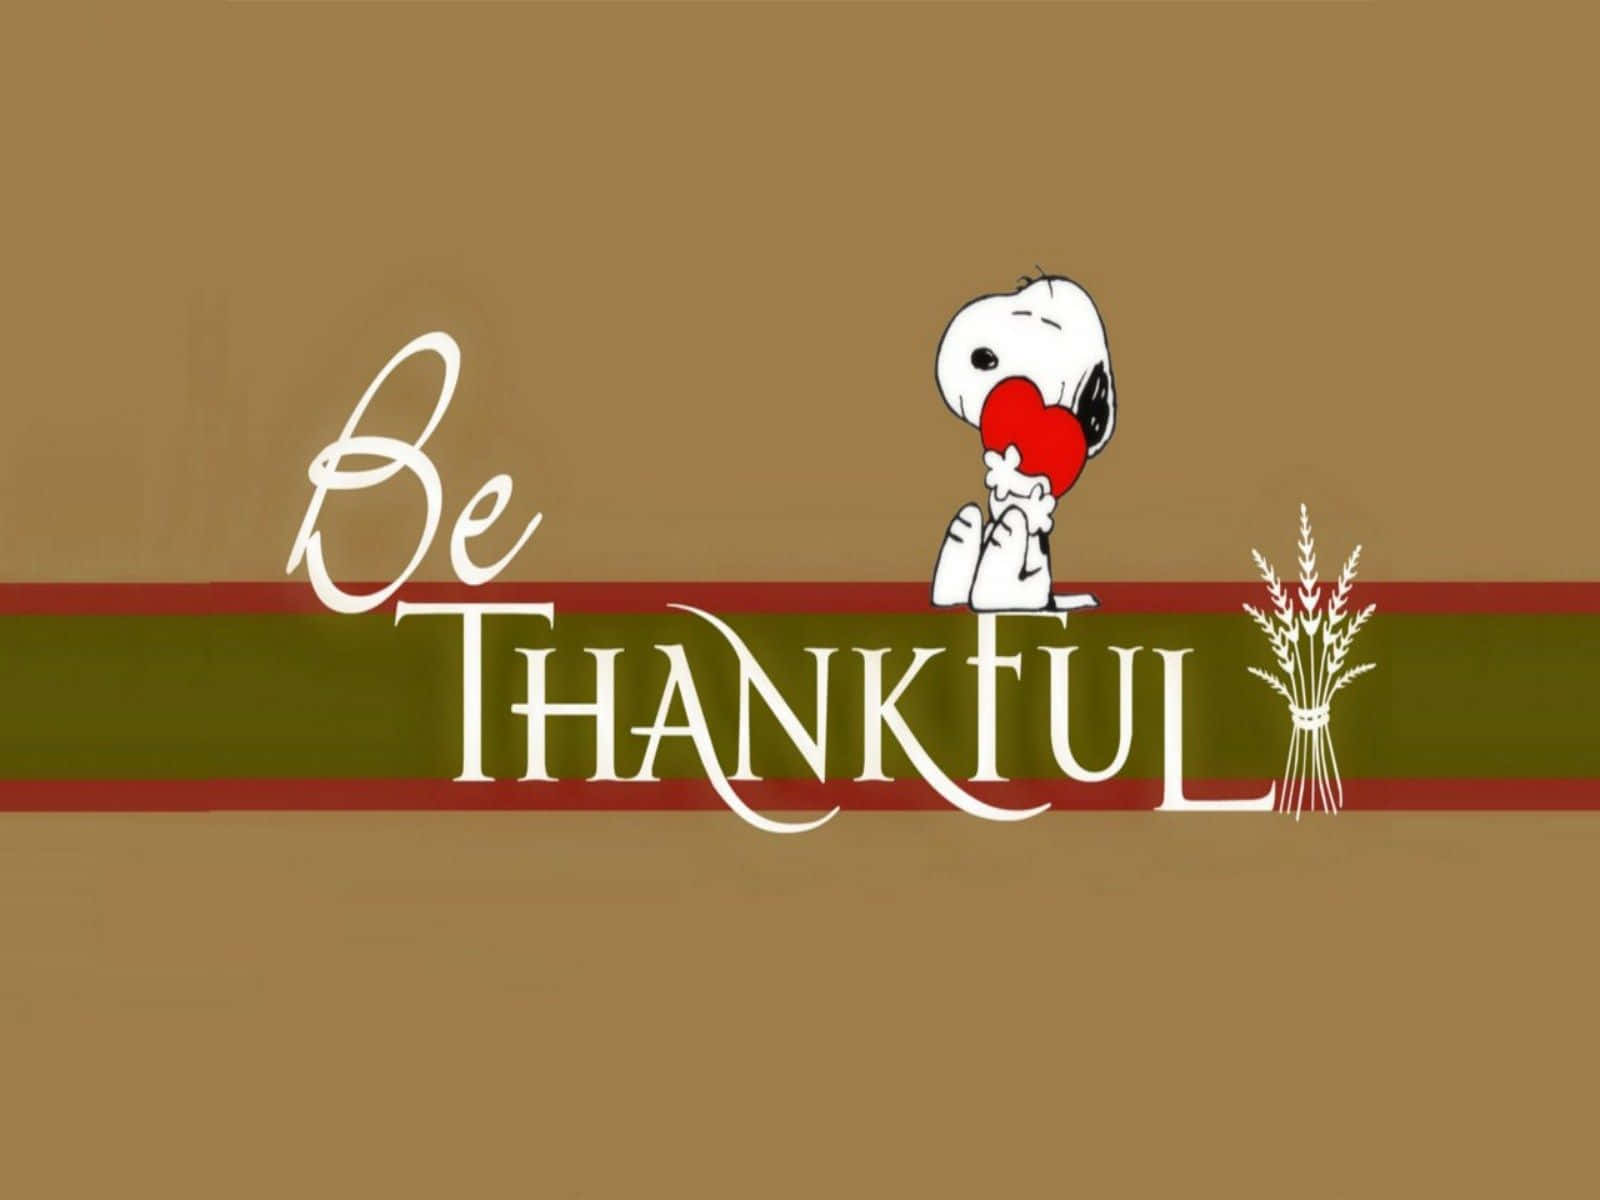 Be Thankful Wallpapers Background